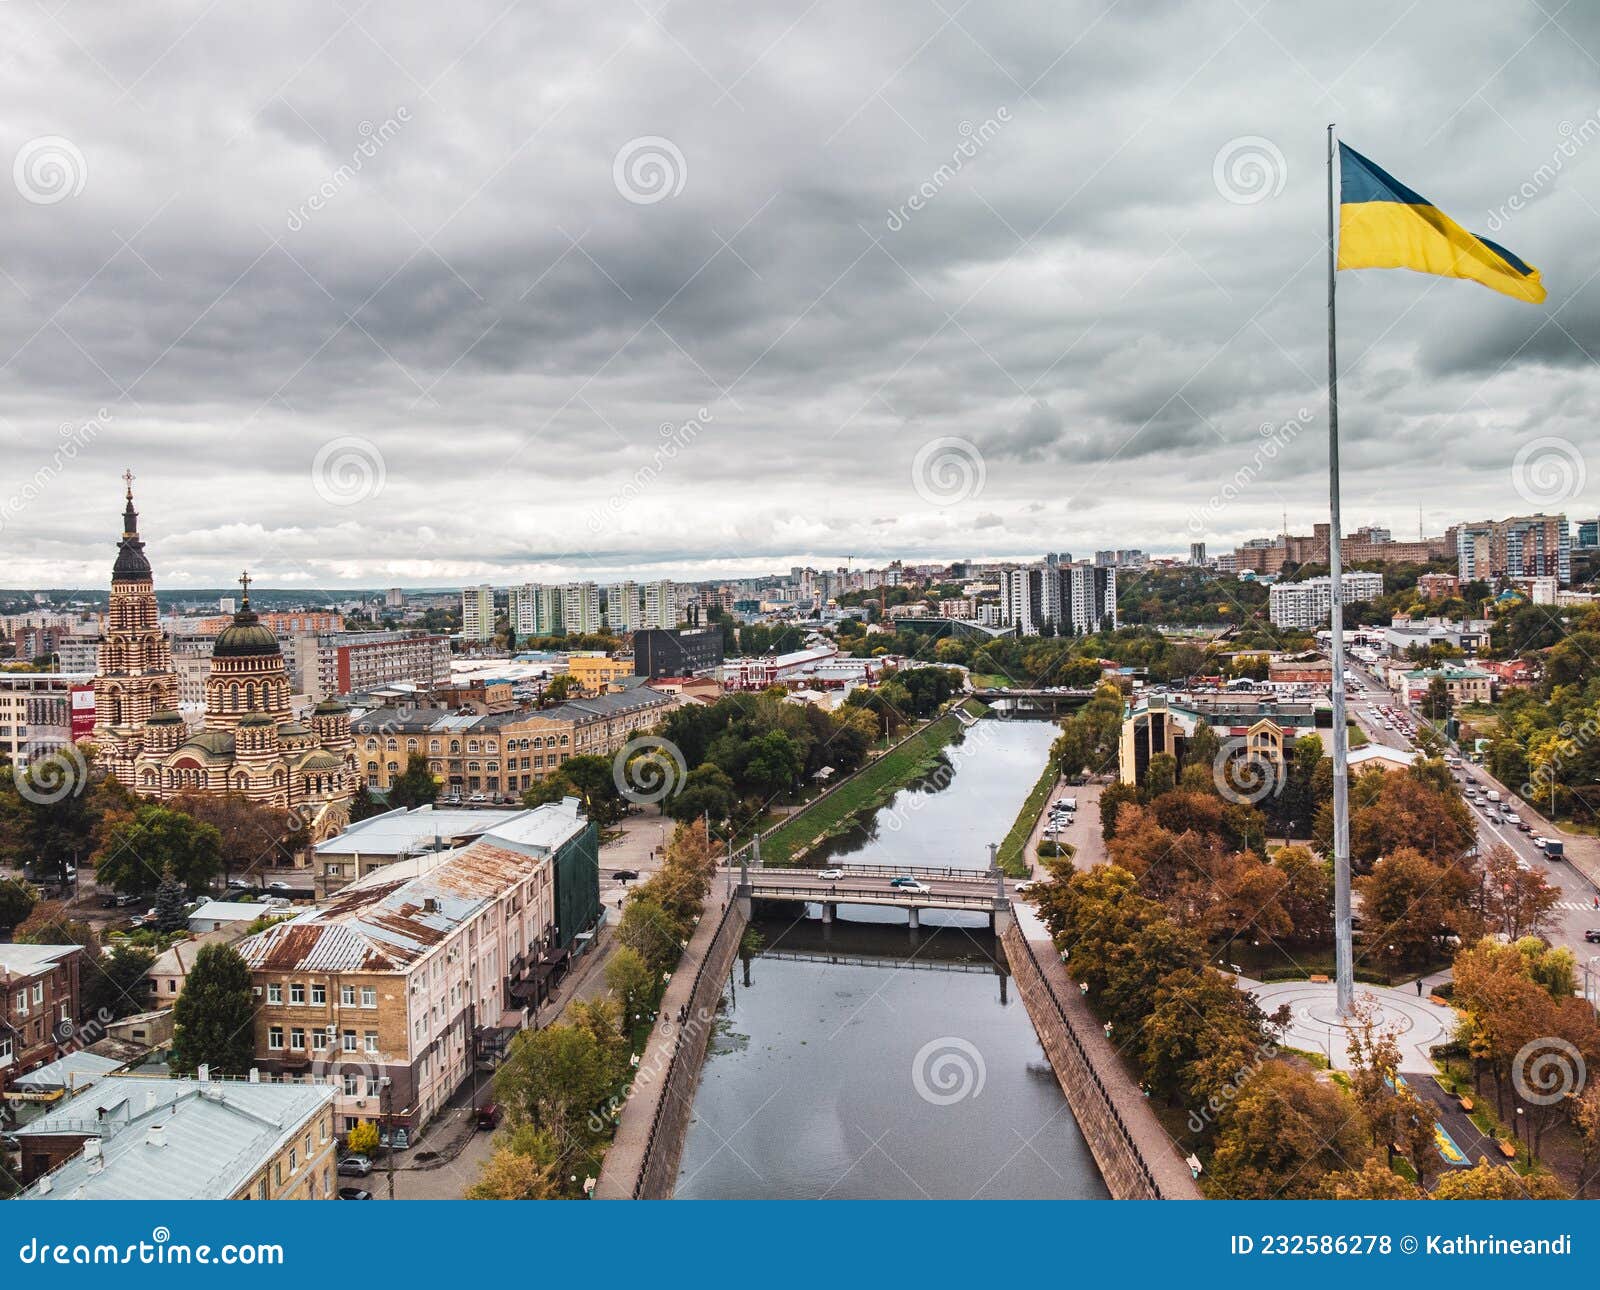 Here's how Kharkiv looks after Russian bombing